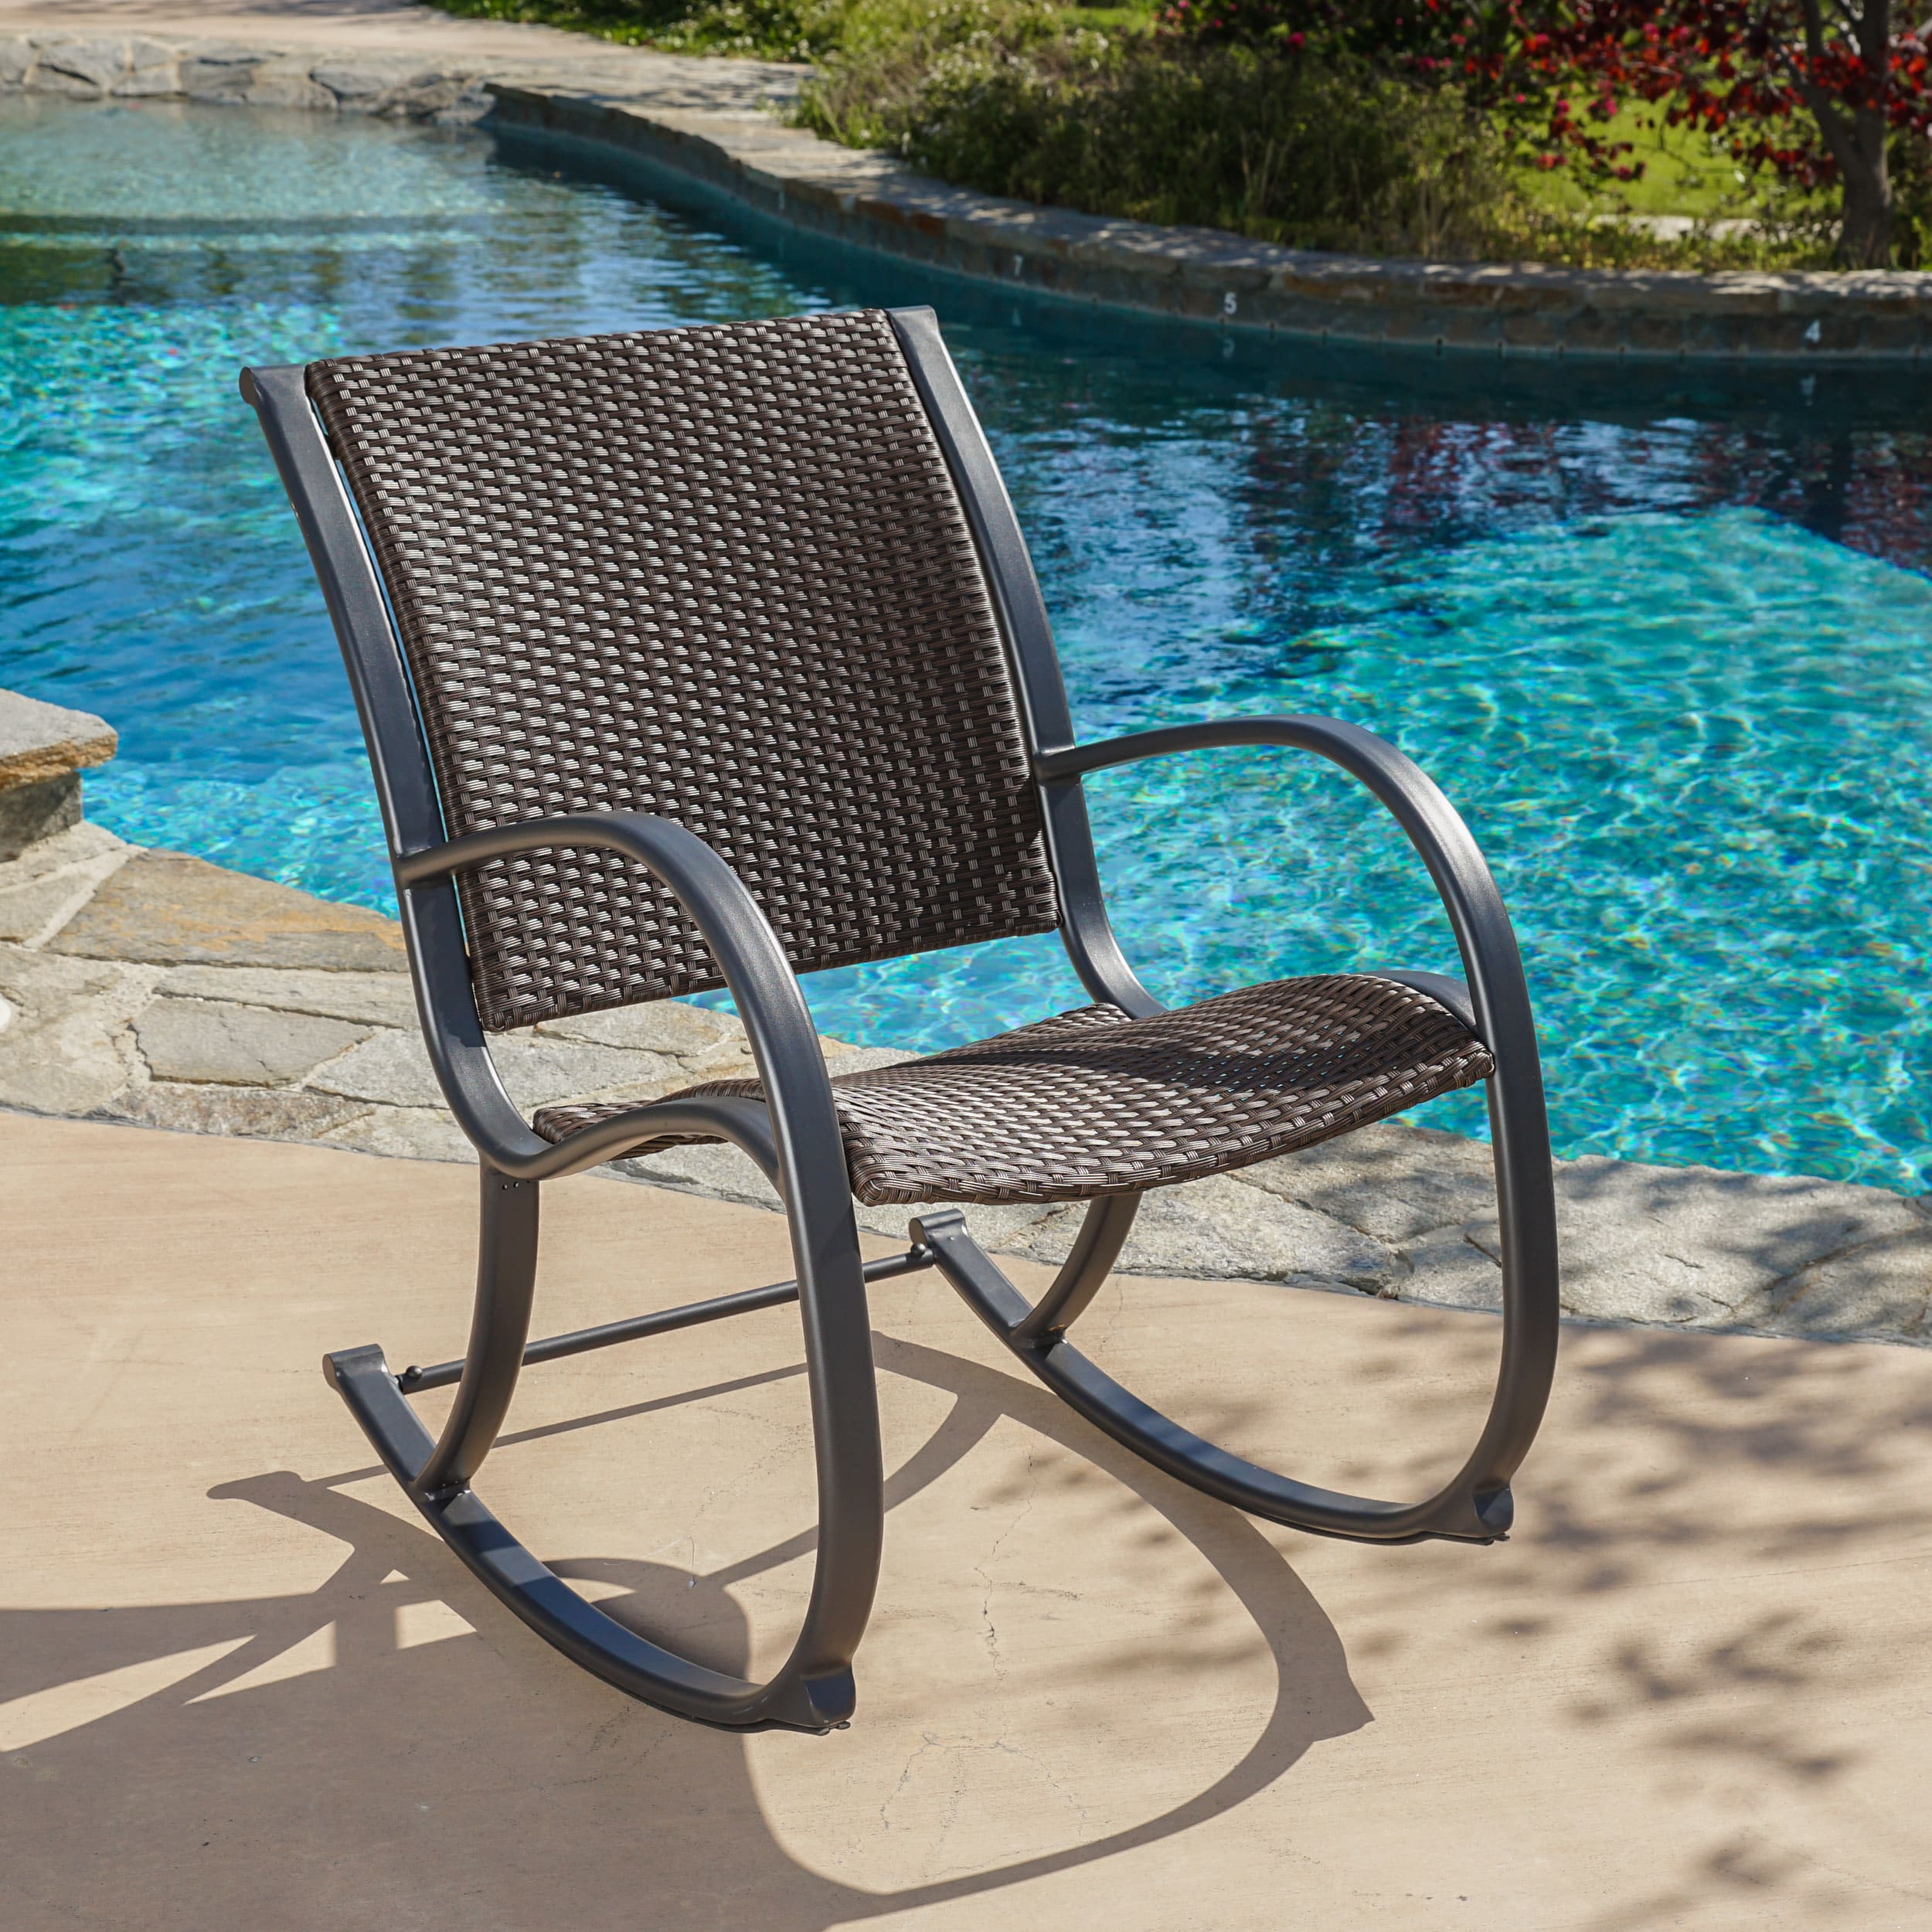 Shop Gracie's Outdoor Wicker Rocking Chair by Christopher Knight Home